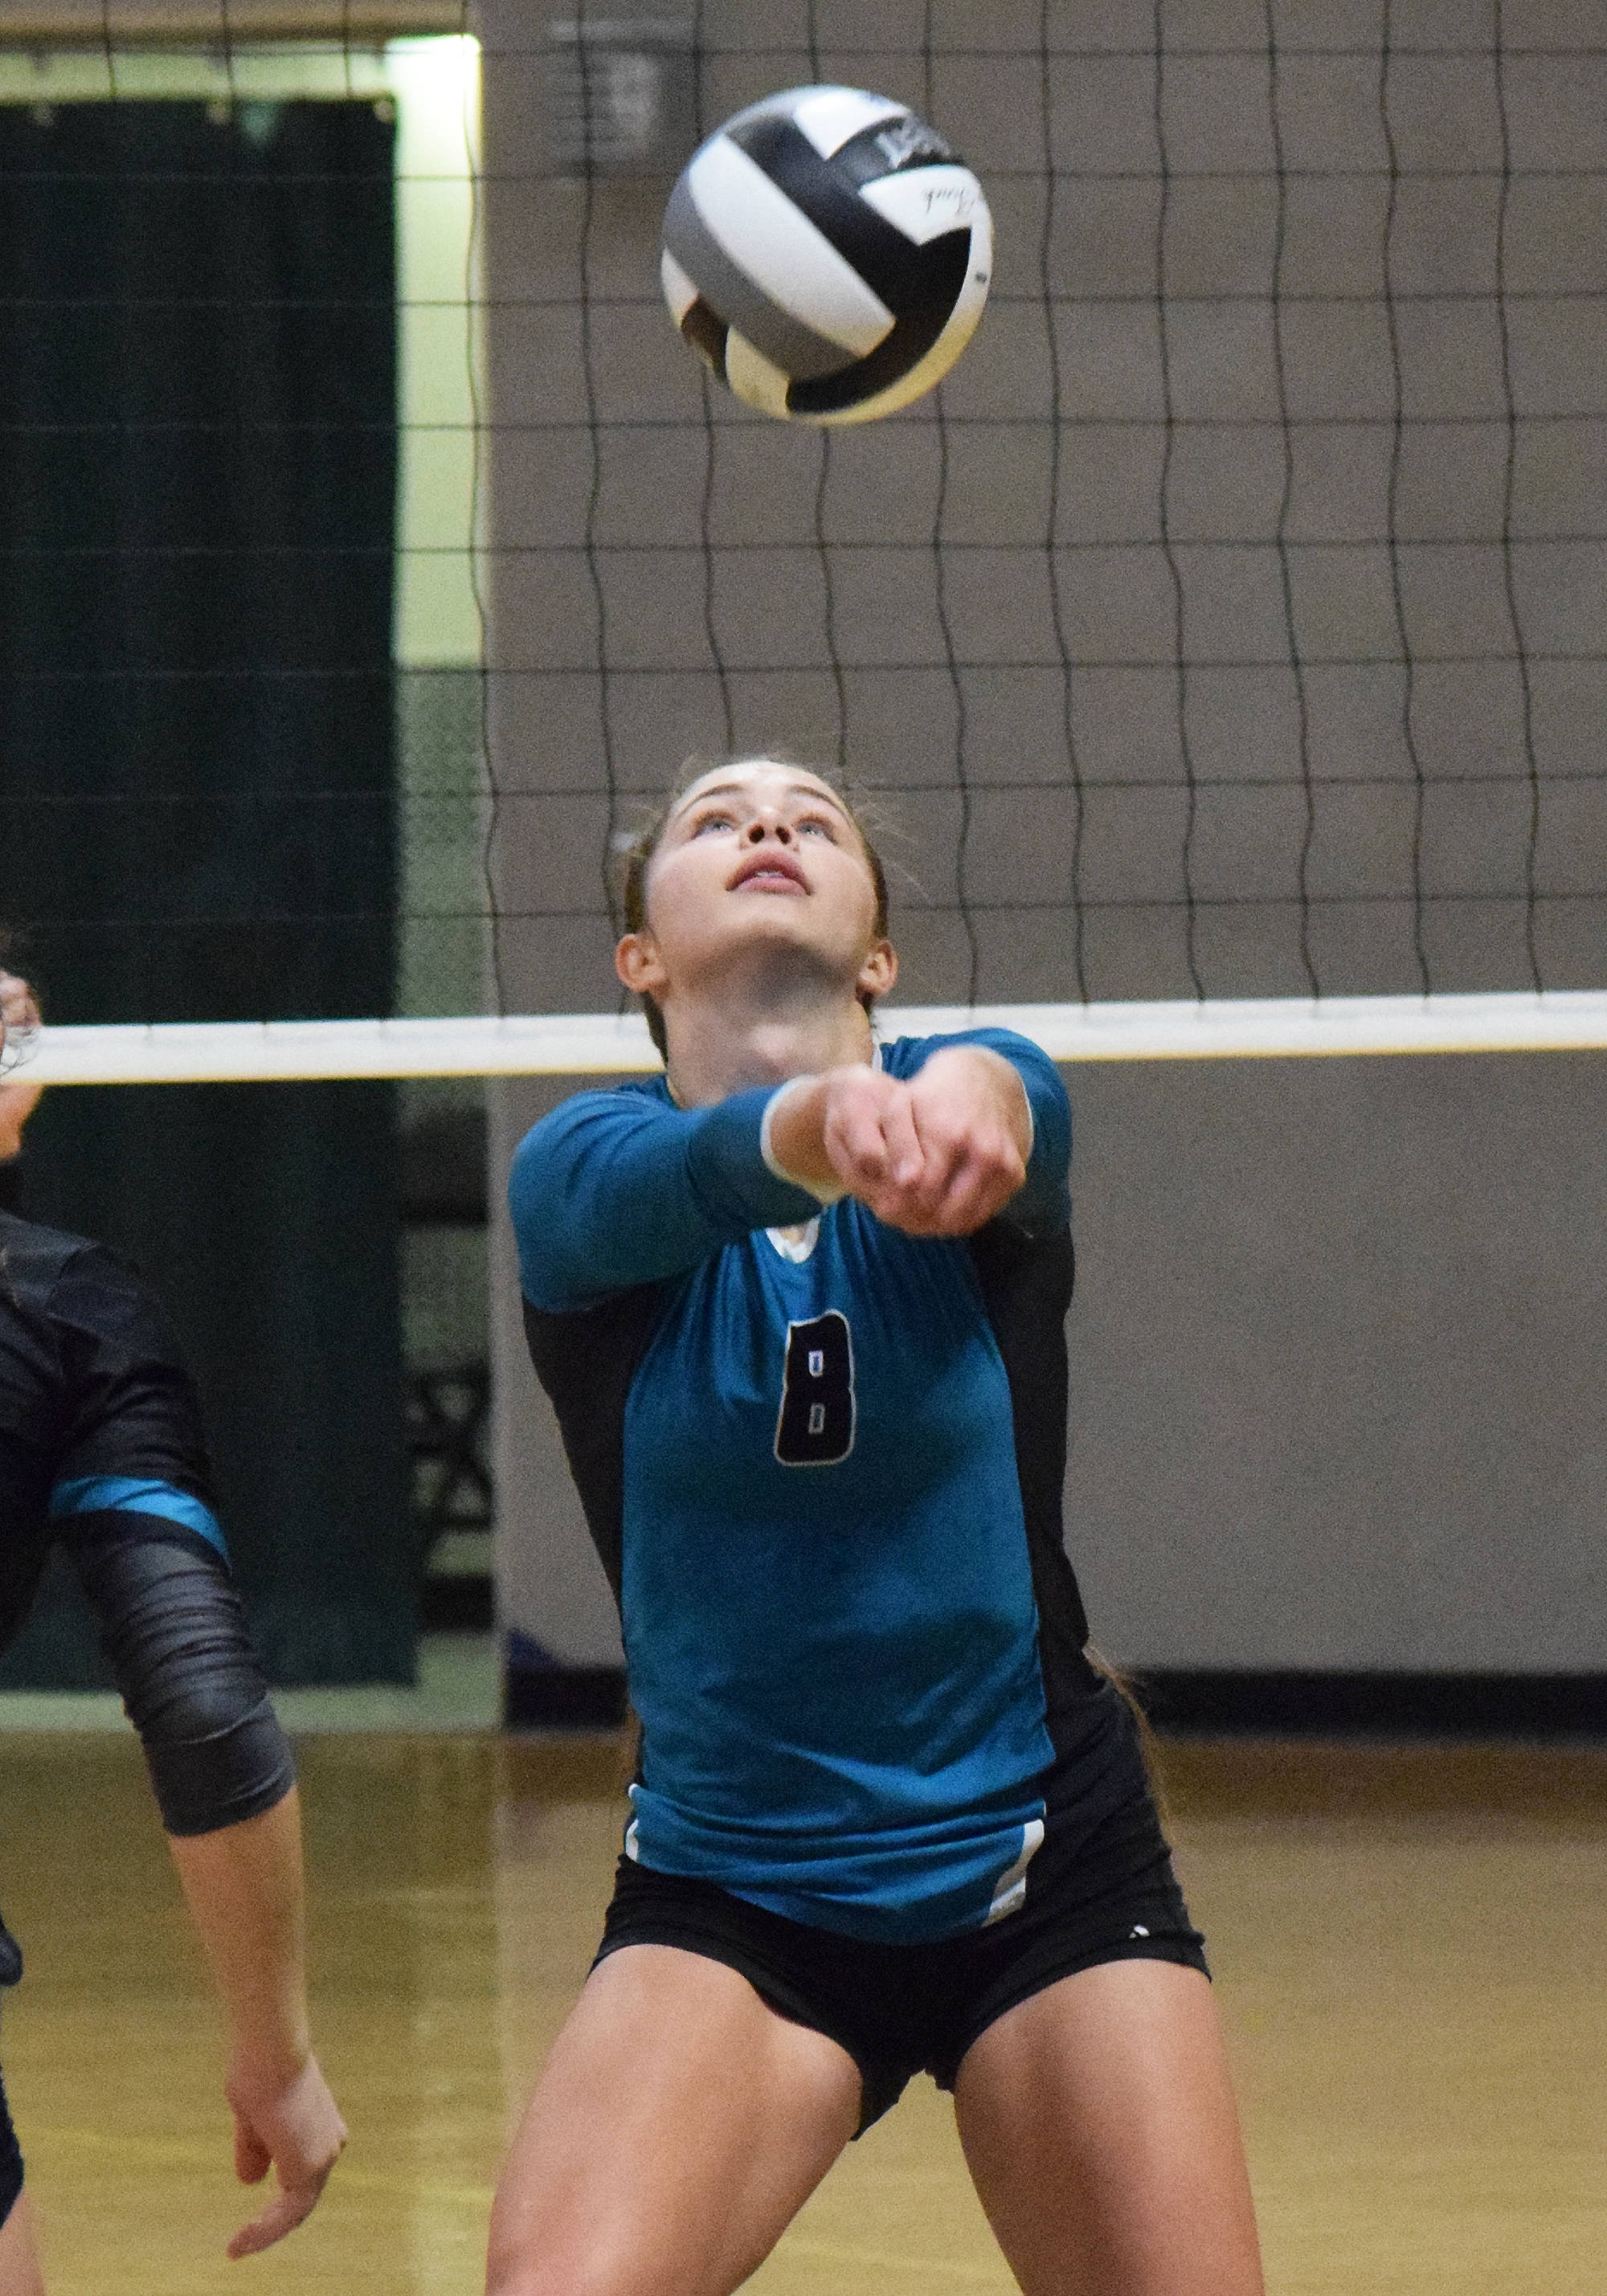 Nikiski’s Kaitlyn Johnson sets up a shot Friday, Nov. 15, 2019, against Kenai Central at the Class 3A state volleyball tournament at the Alaska Airlines Center in Anchorage, Alaska. (Photo by Joey Klecka/Peninsula Clarion)